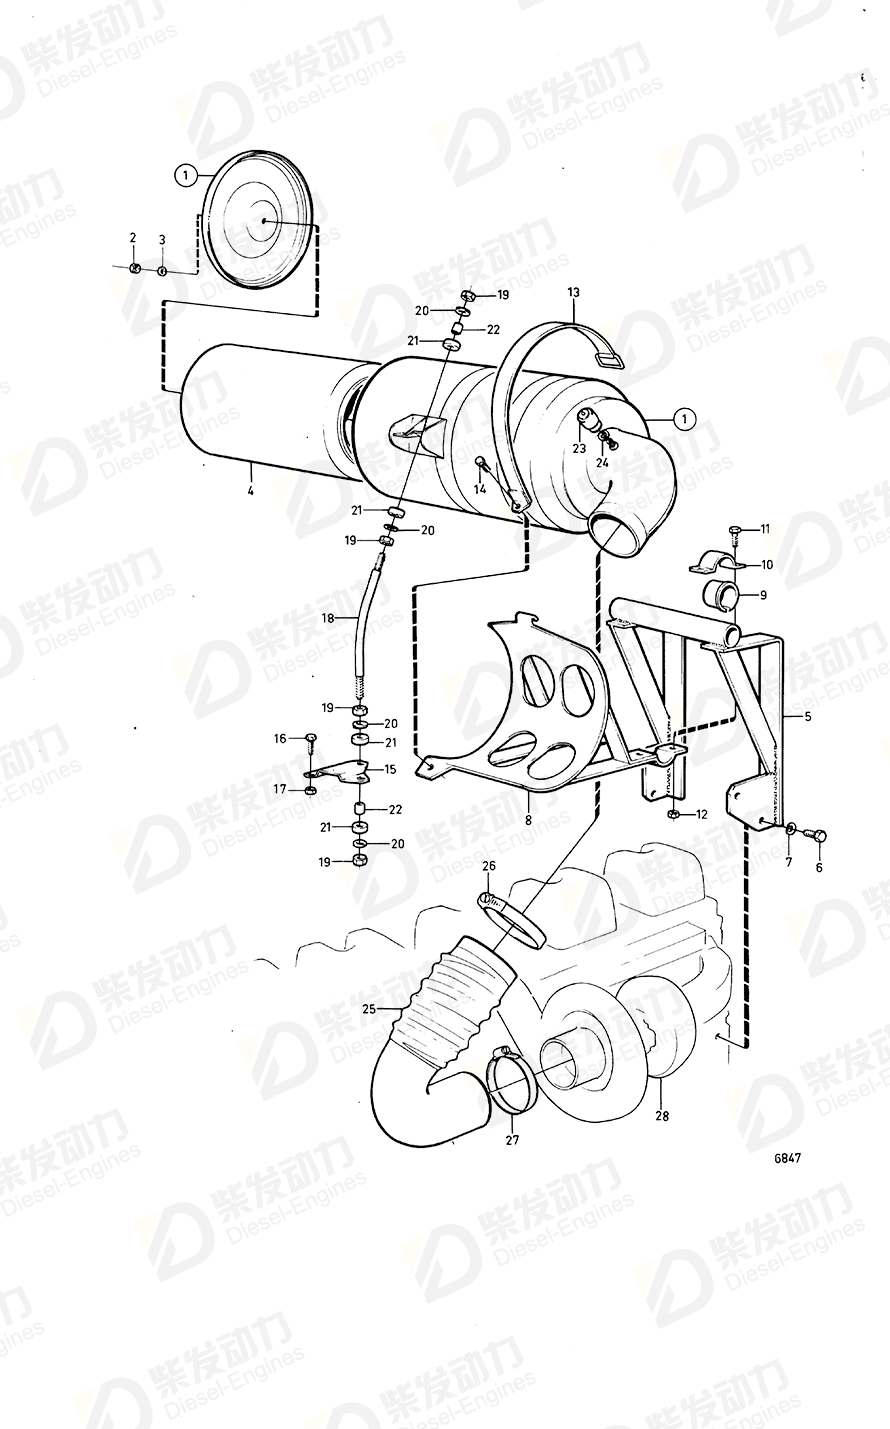 VOLVO Primary filter 1660375 Drawing